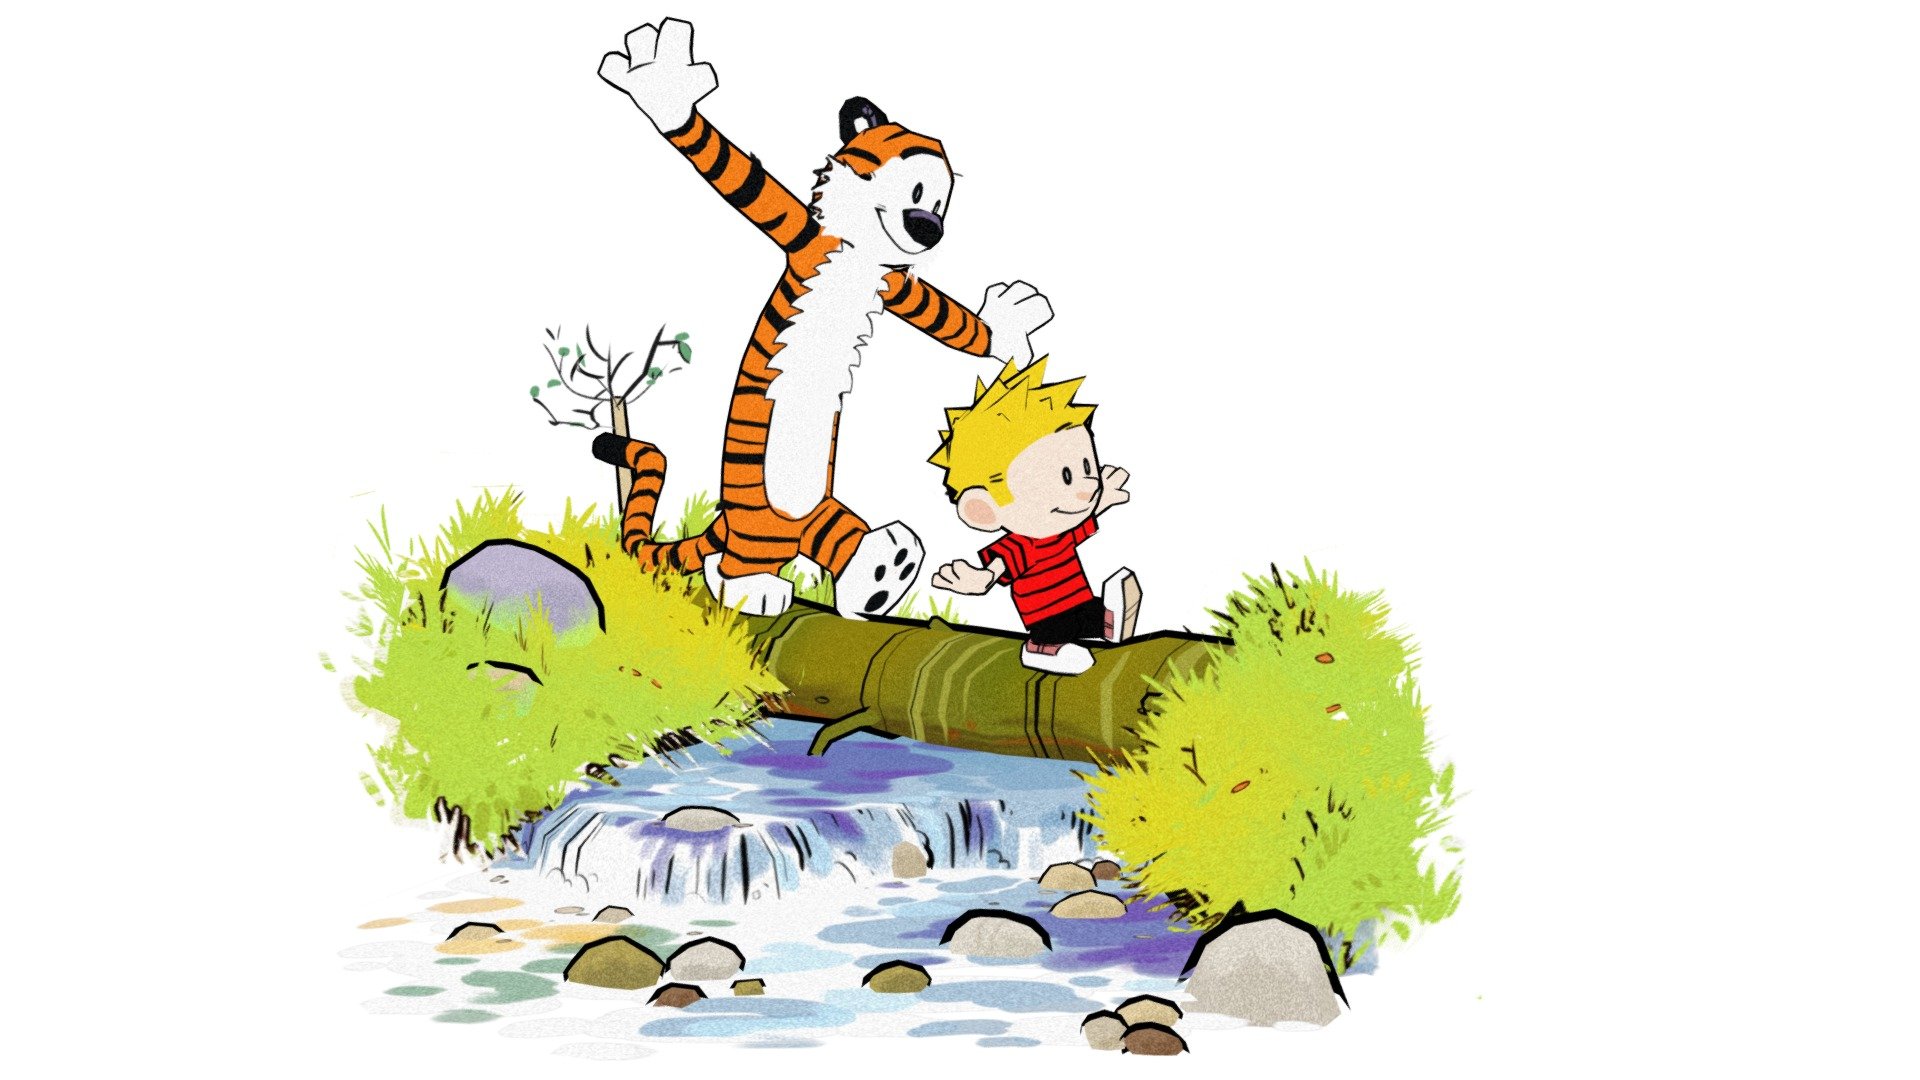 This is a recreation of my favorite Calvin and Hobbes art! I wanted to experiment with a &ldquo;traditional